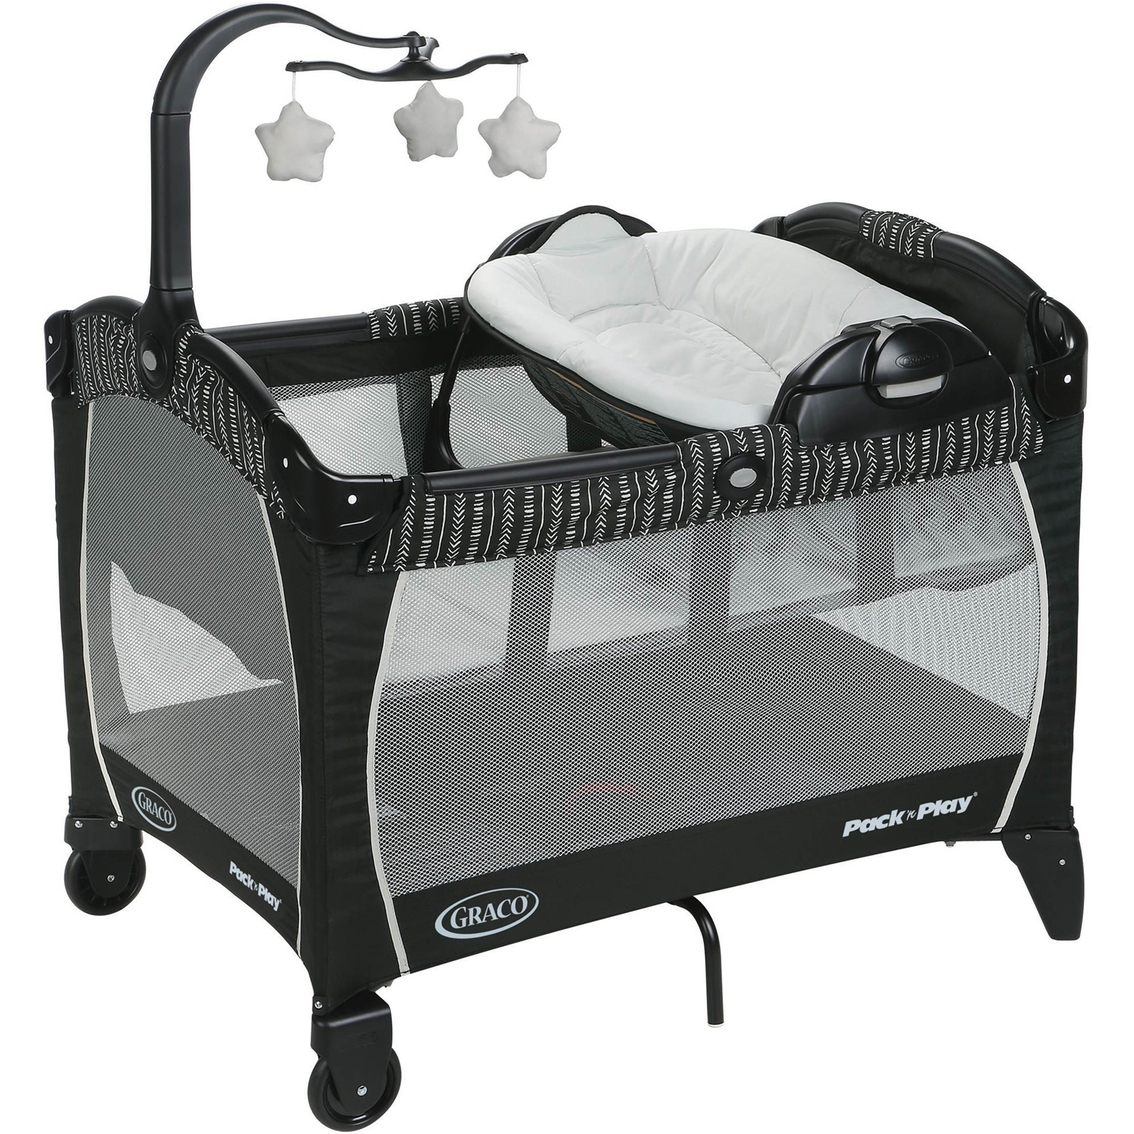 Graco Pack 'n Play Portable Napper and Changer Playard - Image 3 of 4